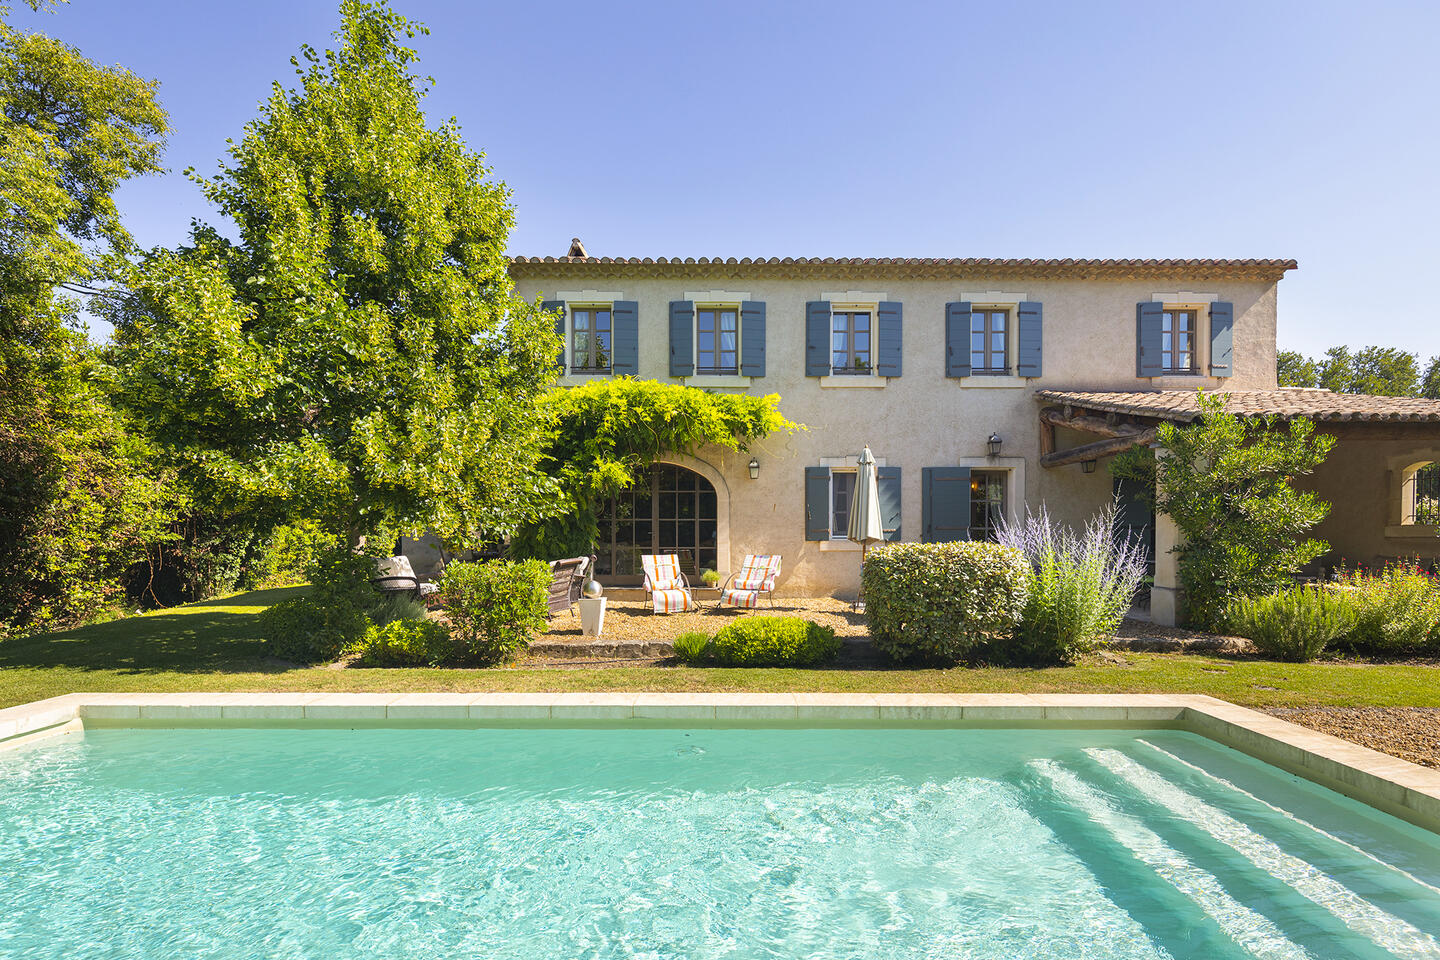 1 - Air-conditioned Bastide with swimming pool near the centre of Saint-Rémy: Villa: Pool